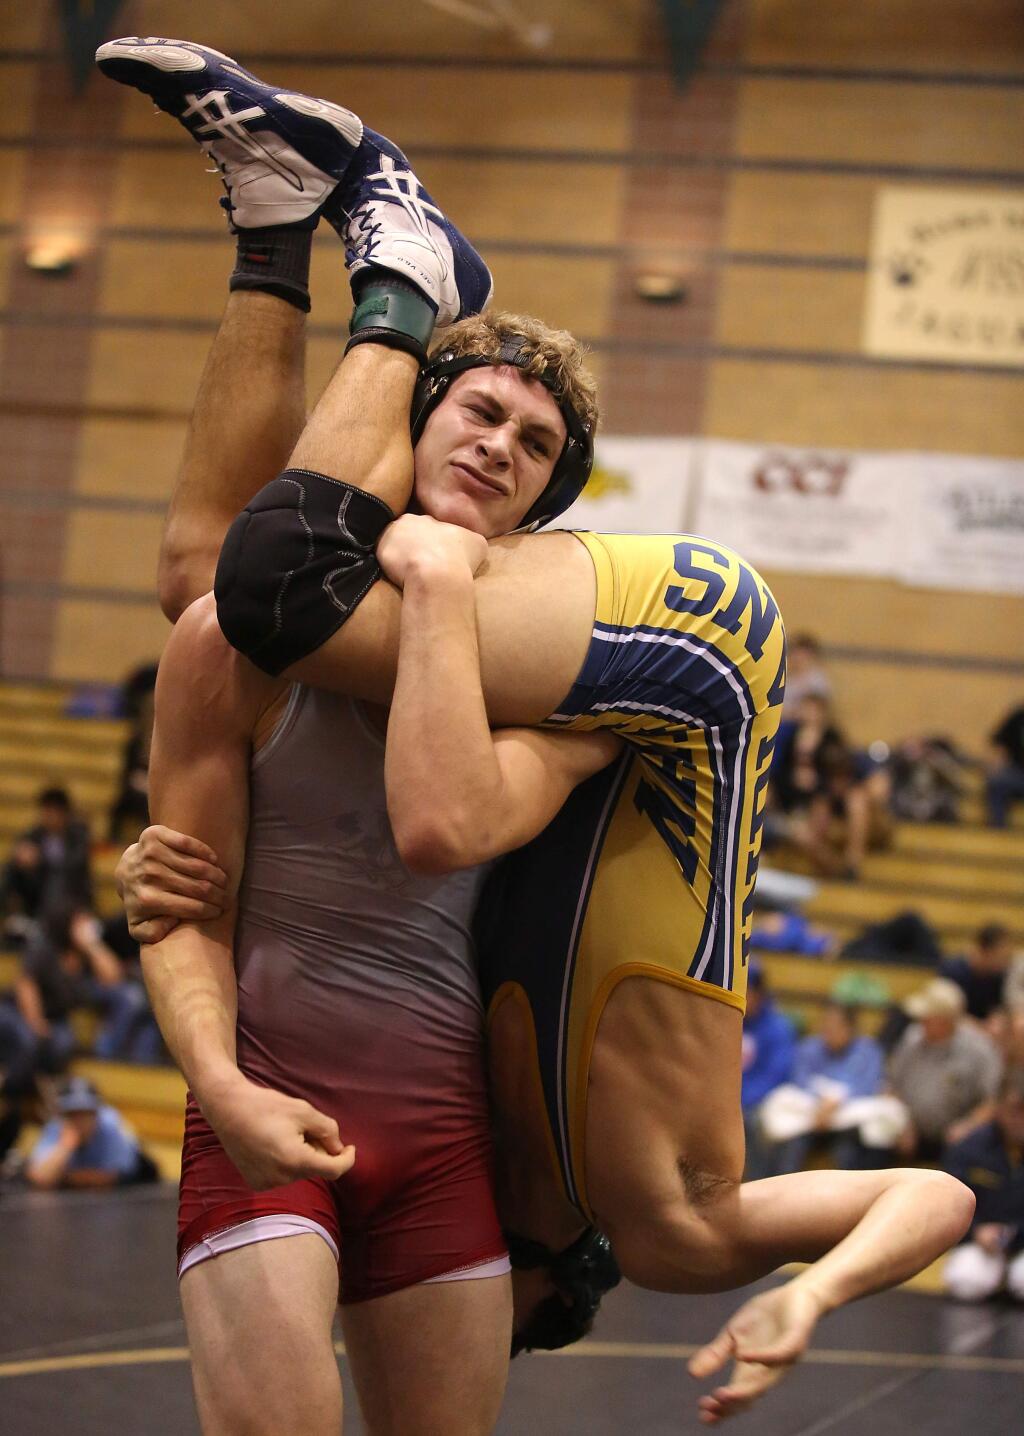 Healdsburg's Jacob Sloma, left, defeated Napa's Alec Richmond in the 170 weight class during the King of the Mat wrestling tournament held at Windsor High School, Saturday, January 17, 2015. (Crista Jeremiason / The Press Democrat)